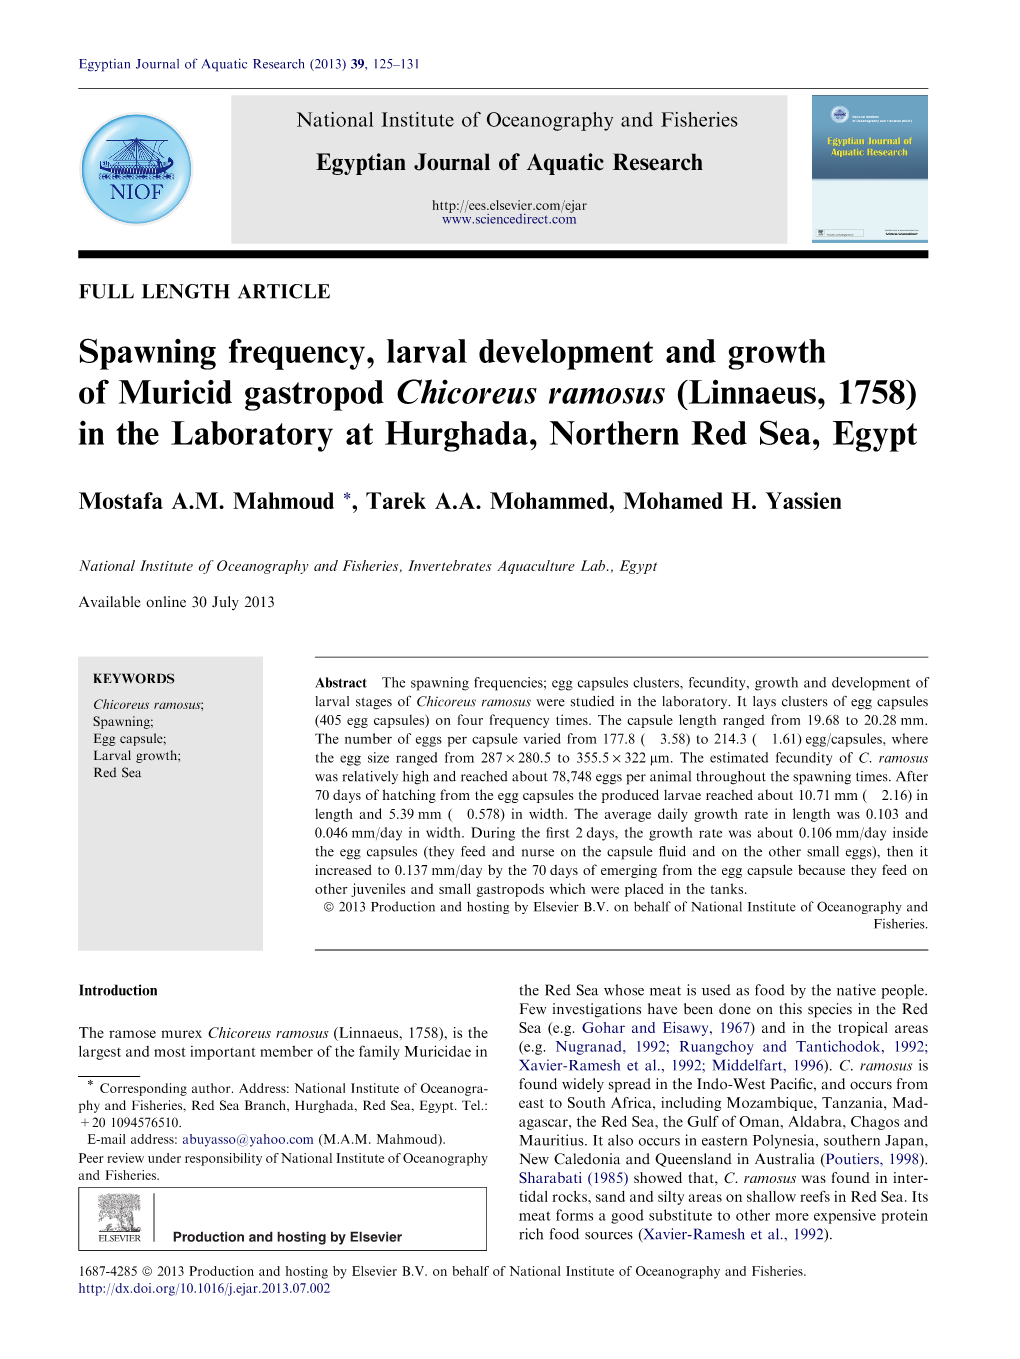 Spawning Frequency, Larval Development and Growth of Muricid Gastropod Chicoreus Ramosus (Linnaeus, 1758) in the Laboratory at Hurghada, Northern Red Sea, Egypt